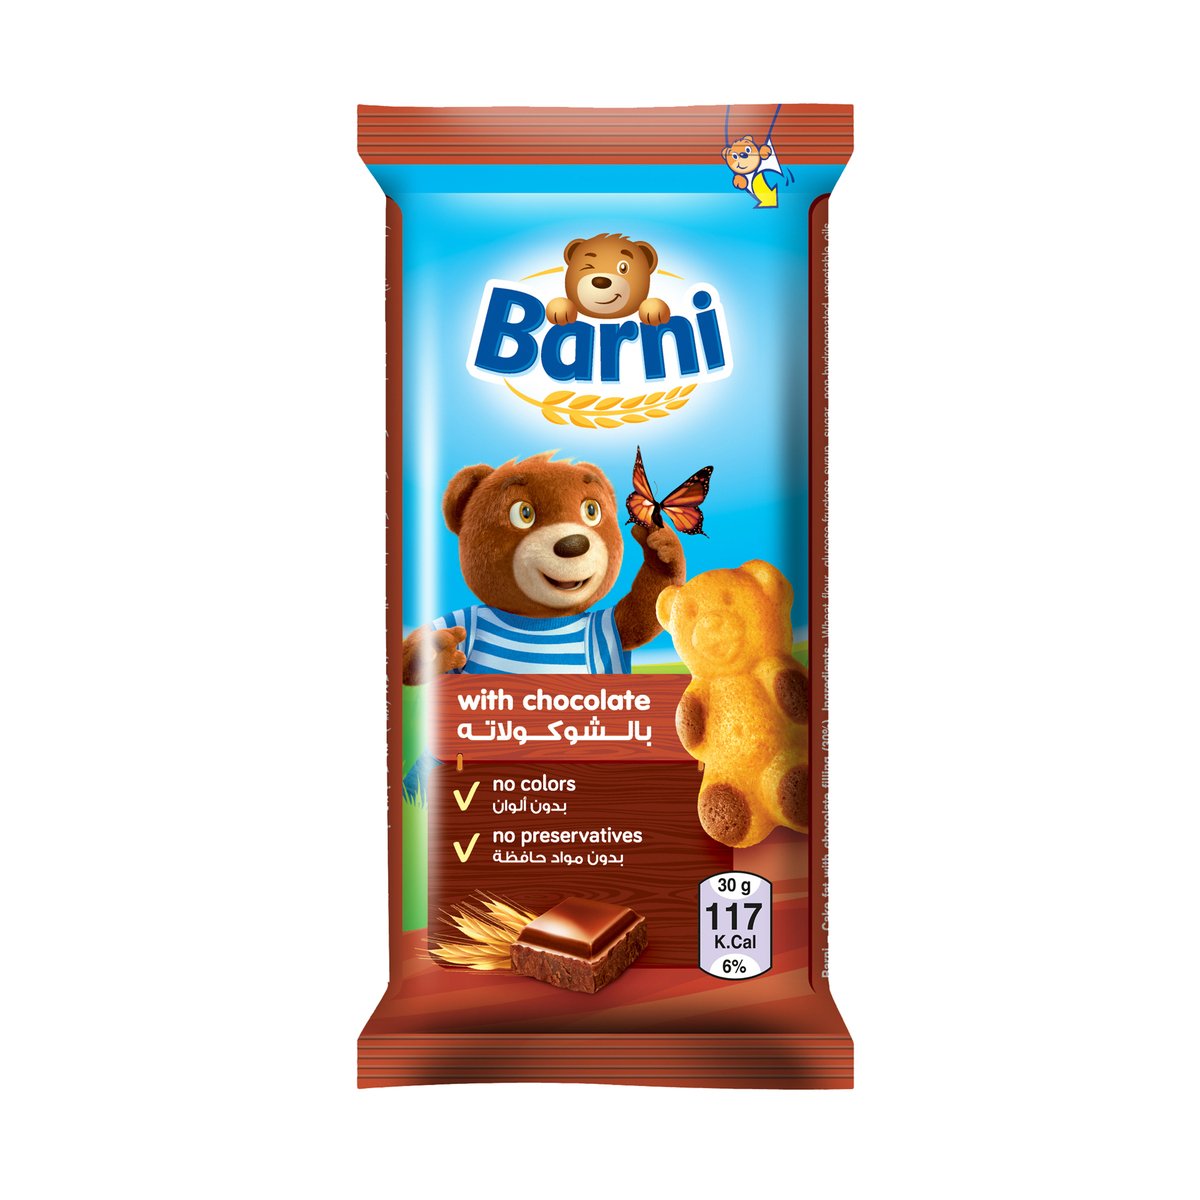 Barni Soft Cake With Chocolate Filling Value Pack 12 x 30 g